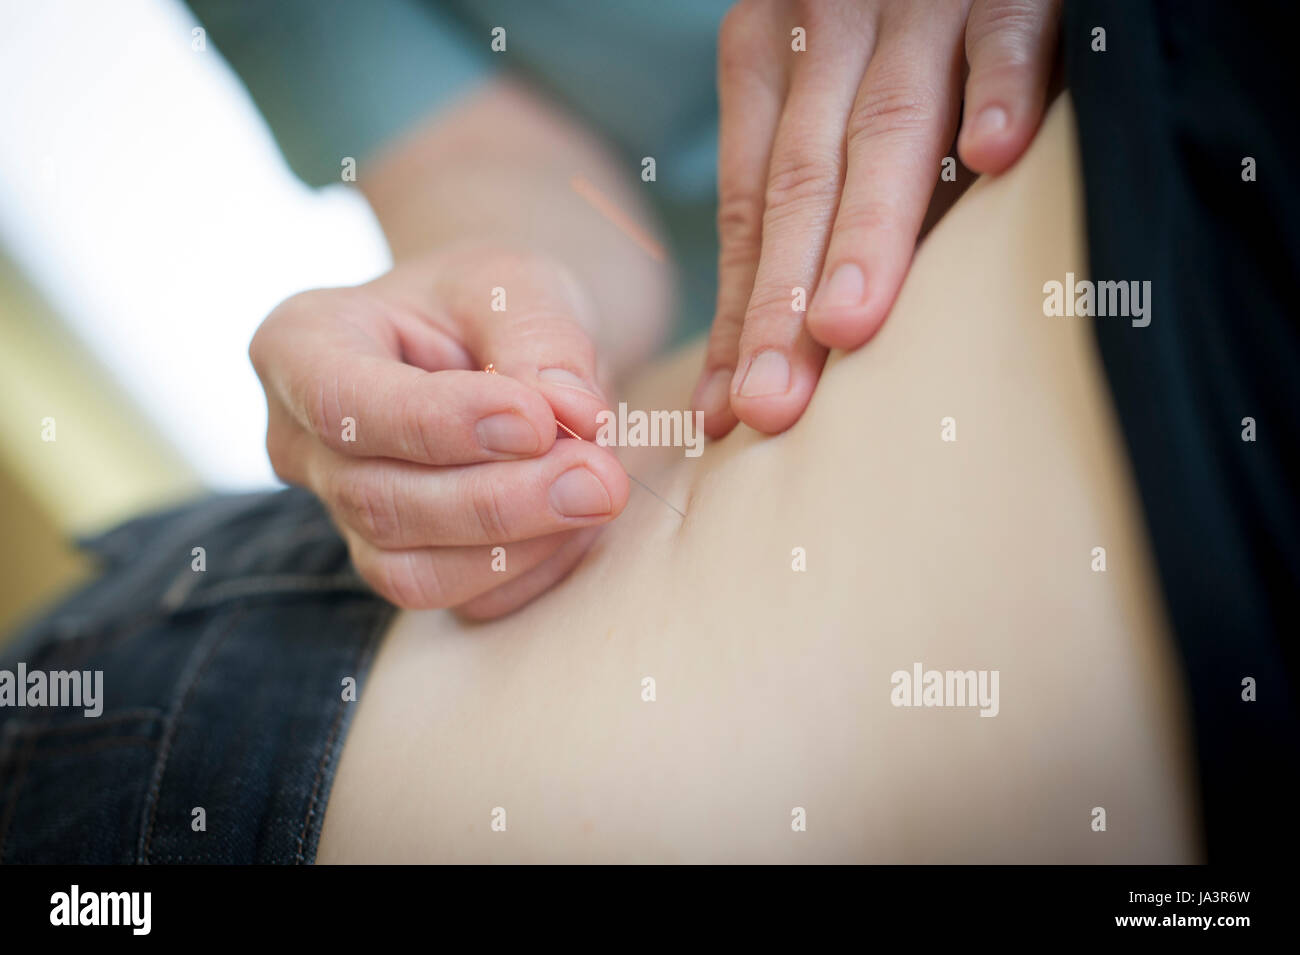 Acupuncture in progress at this healing centre. Stock Photo